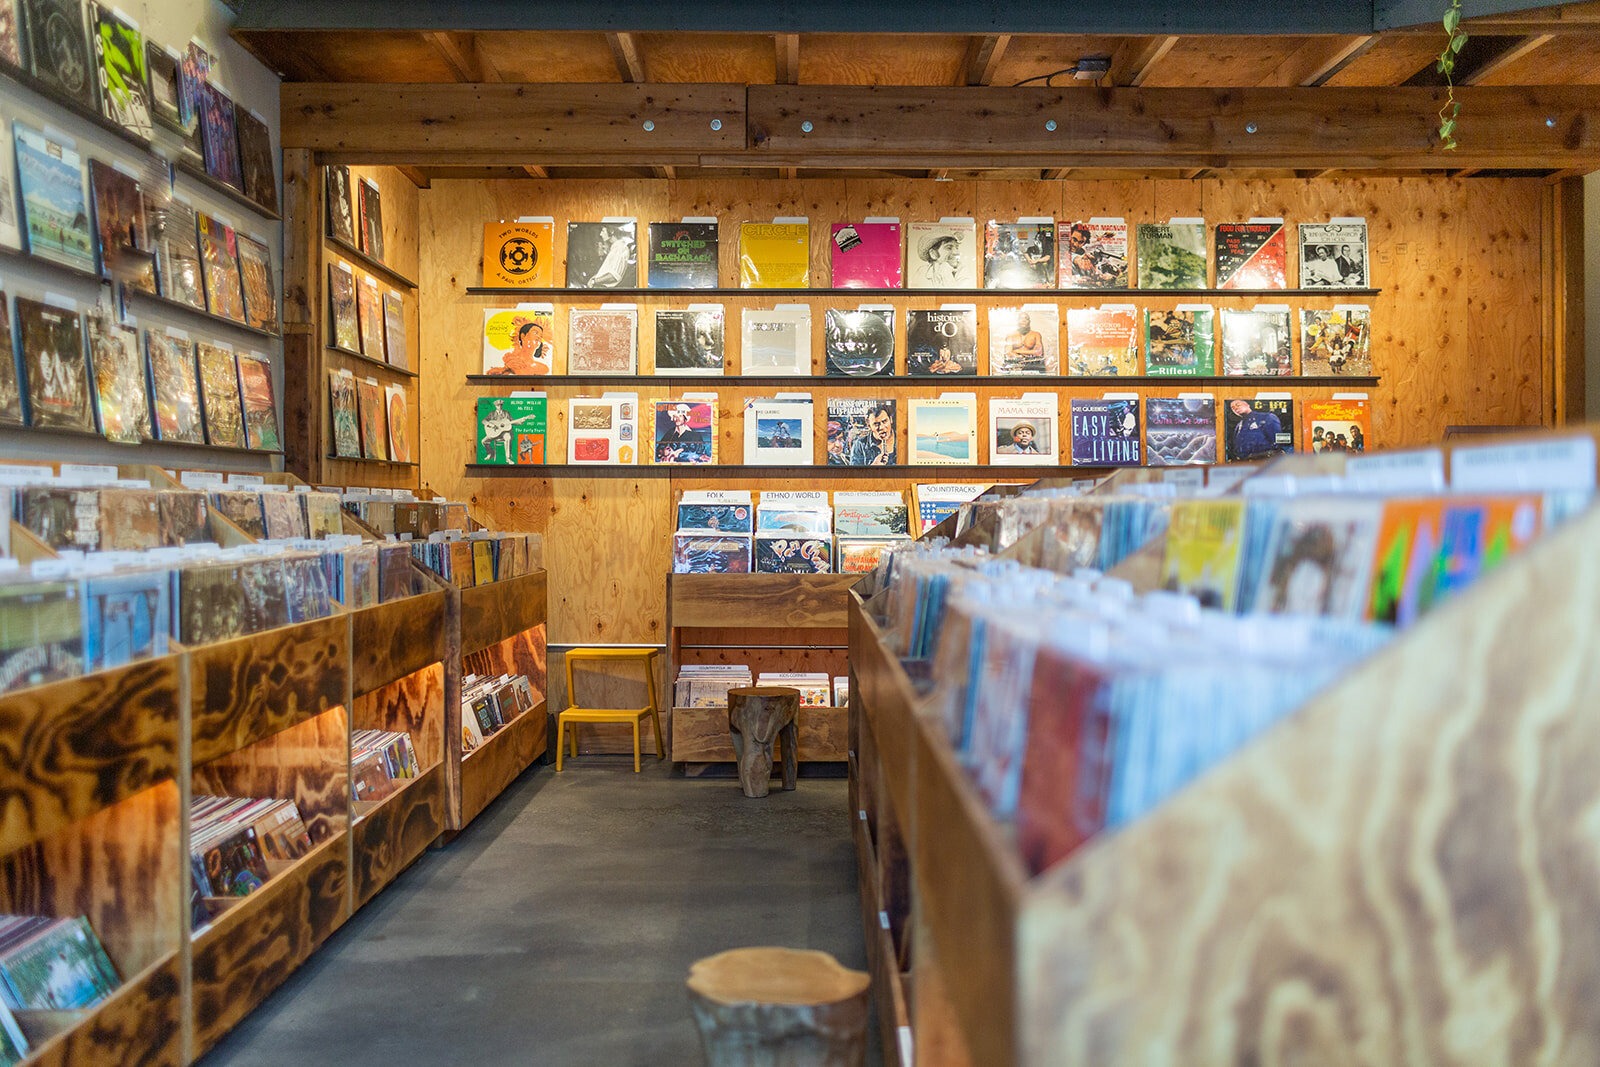 A Guide Record in Seattle - The Ticket